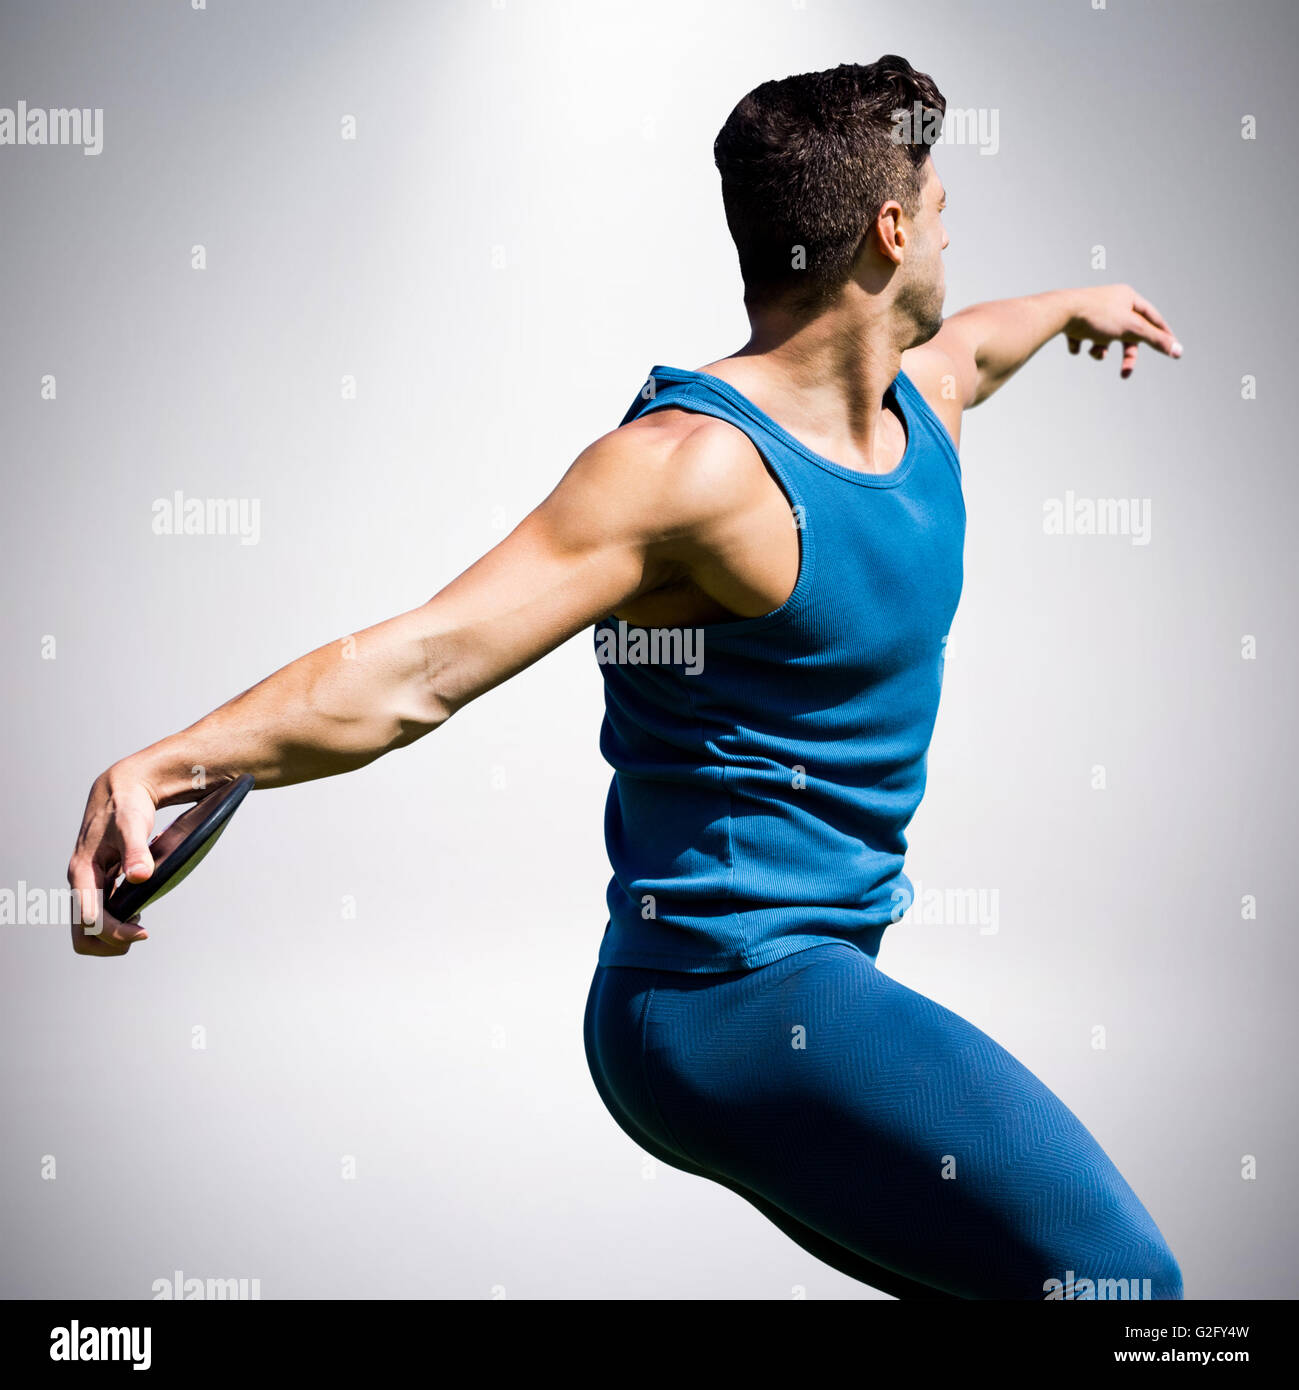 Composite image of side view of man throwing discus Stock Photo